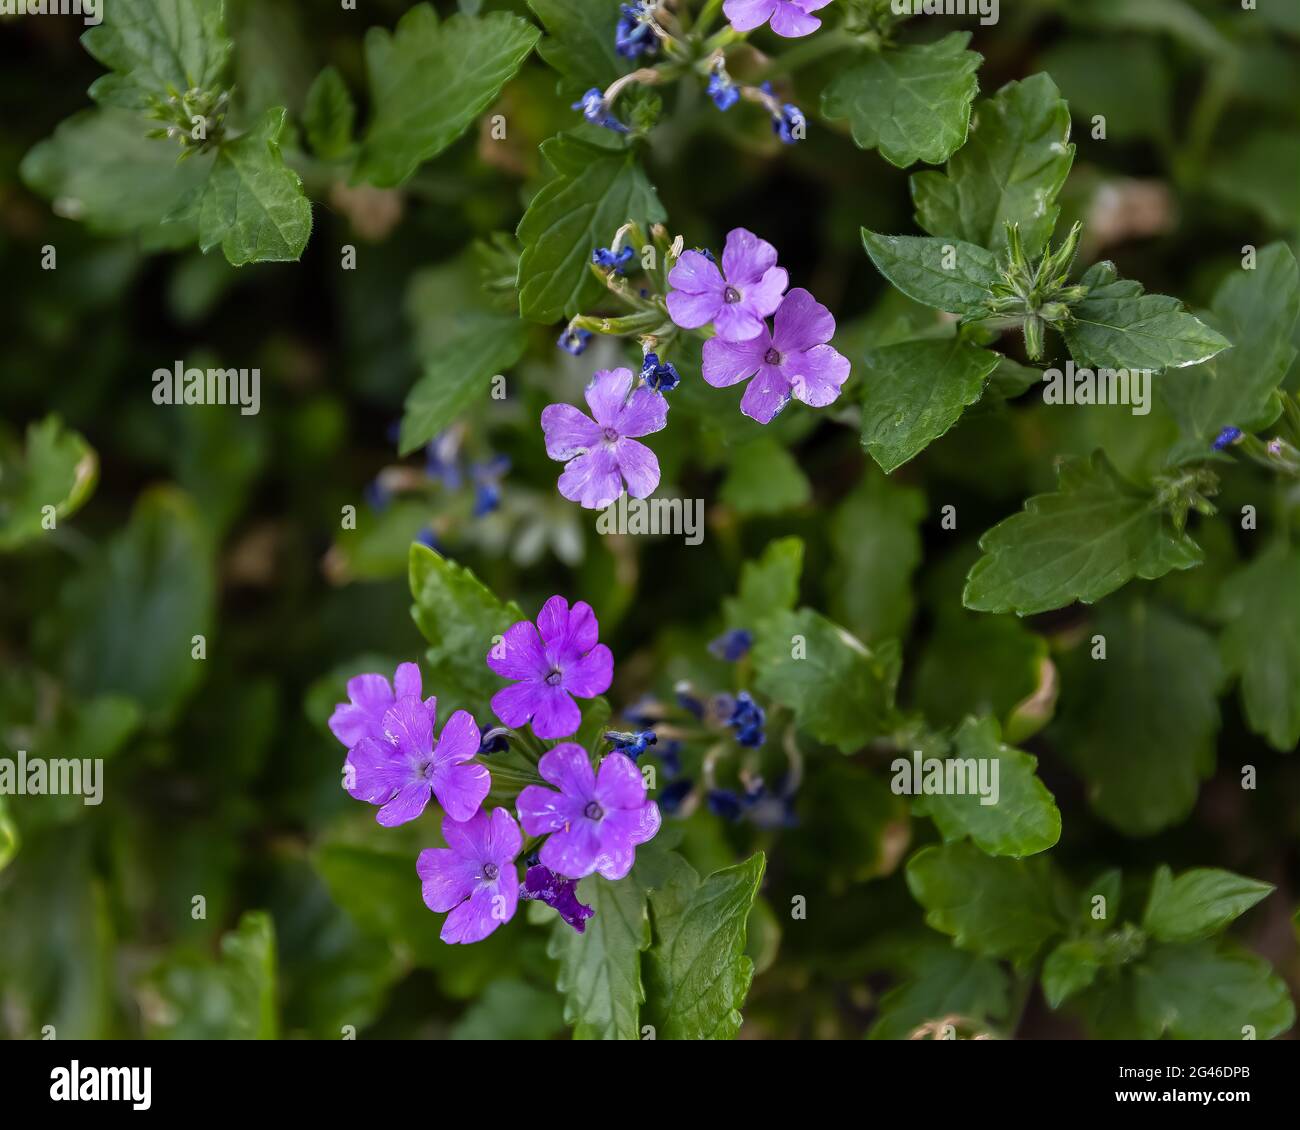 several small purple  Verbena Canadensis blossoms in a flower planter Stock Photo